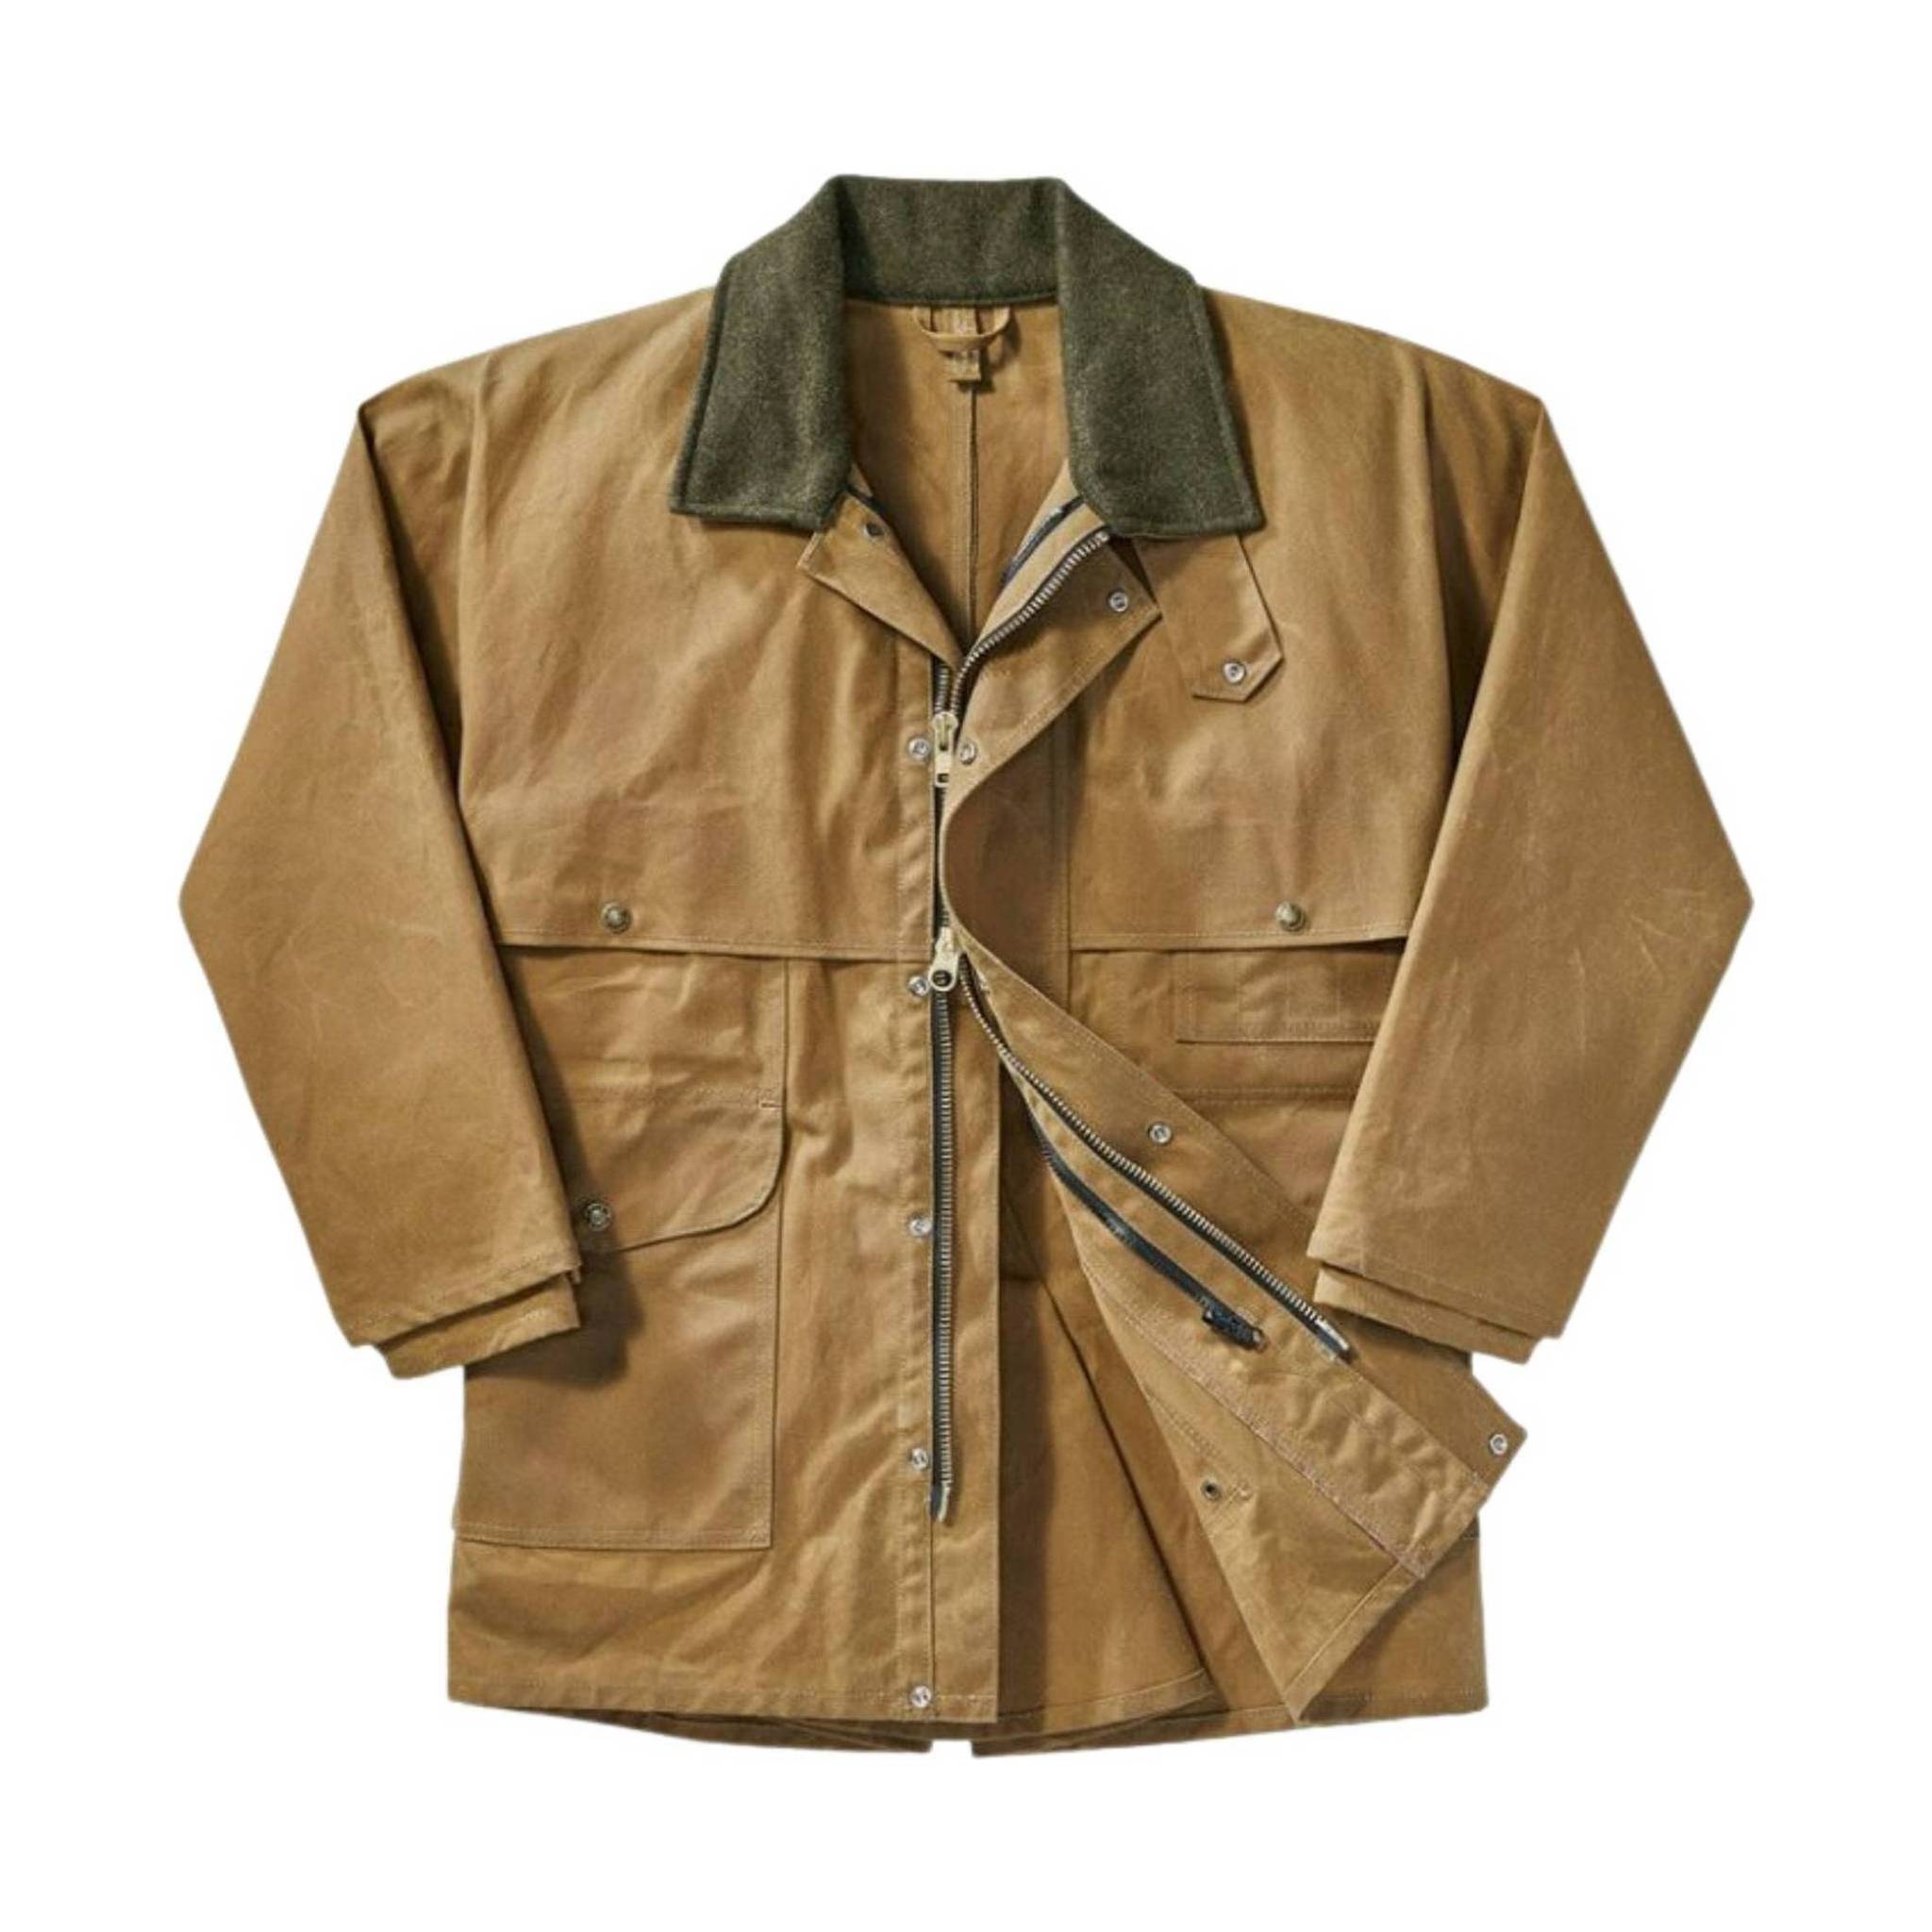 Waterproof your tin cloth and leather coats with Filson's Oil